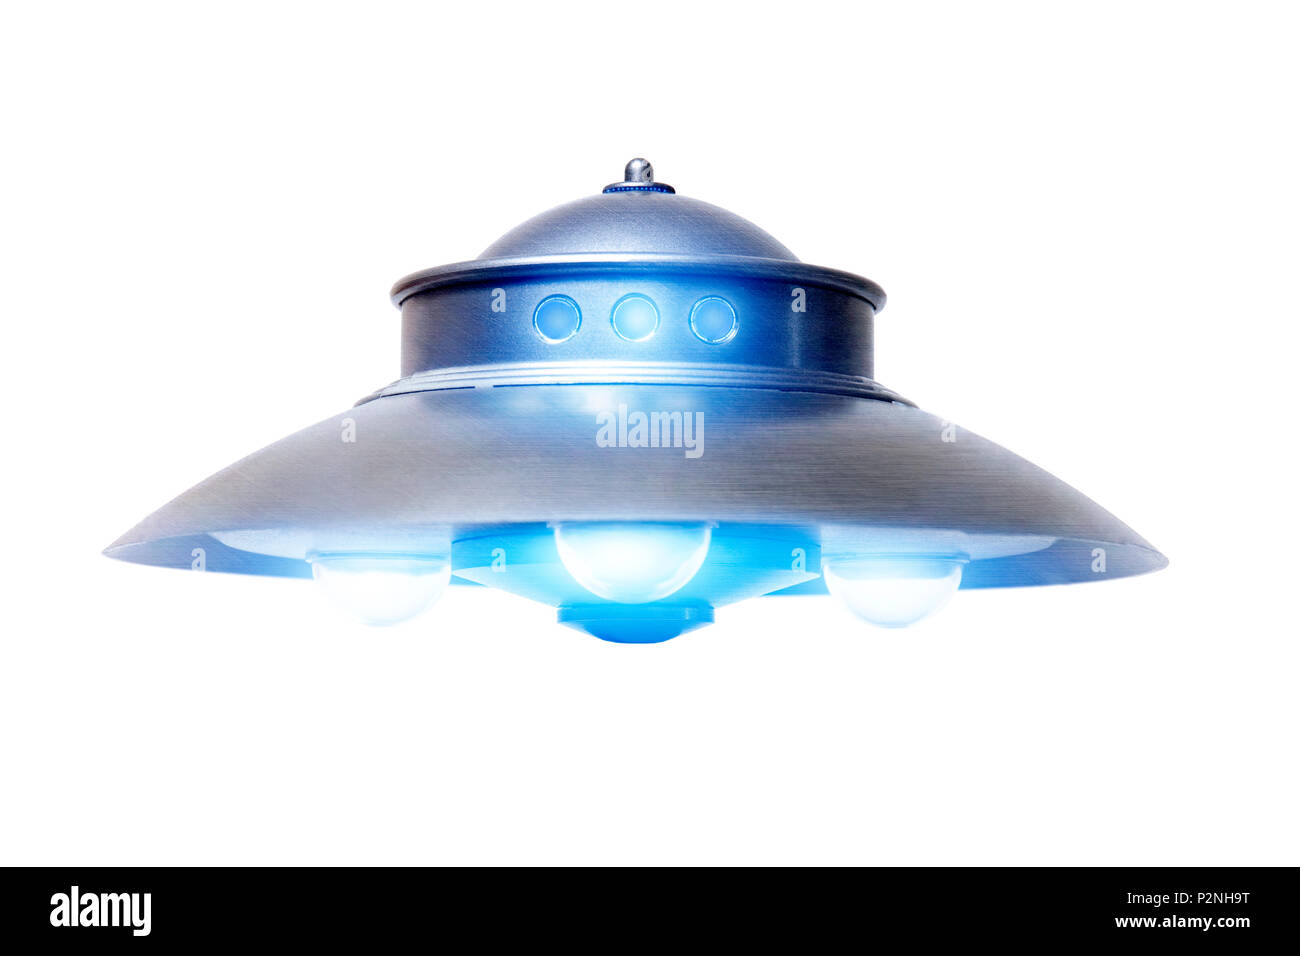 Close view of the classic dome ufo saucer. Stock Photo